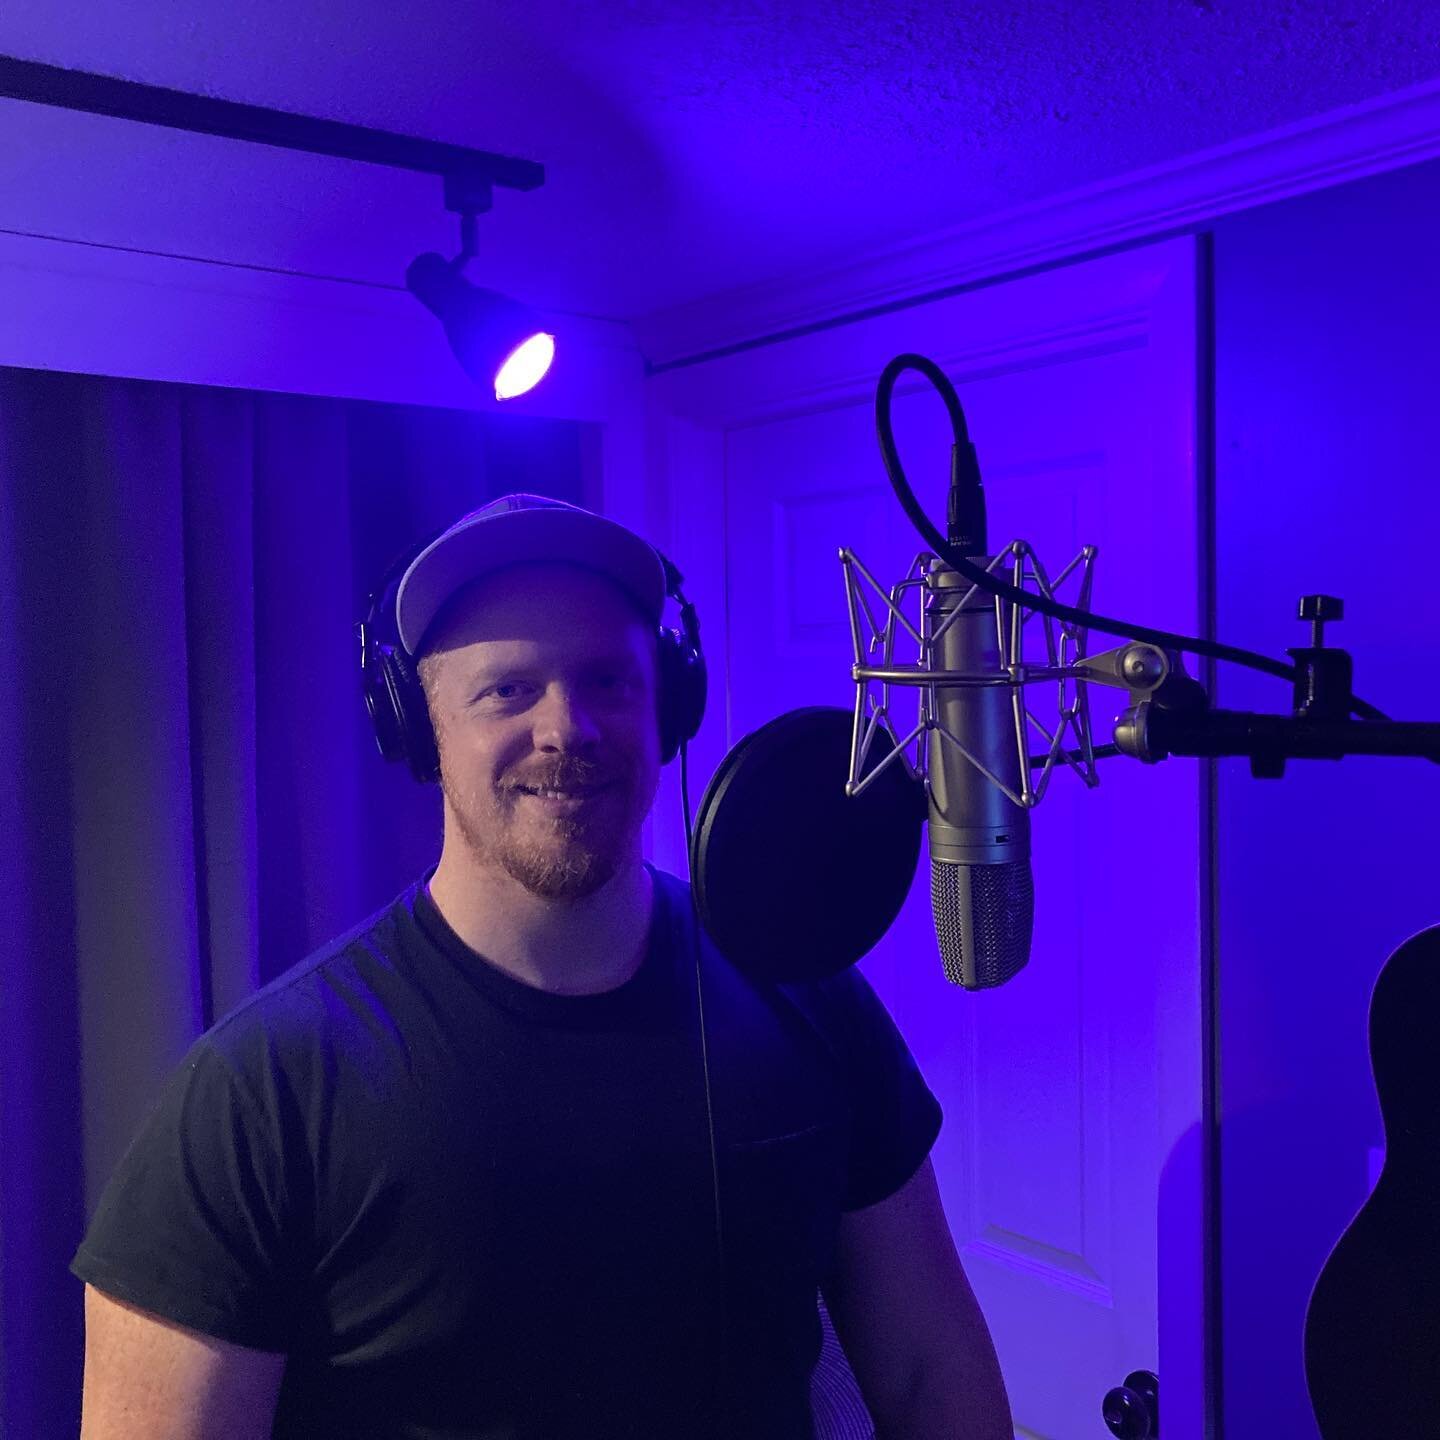 @bbuffin89 in the studio tonight for a vocal session